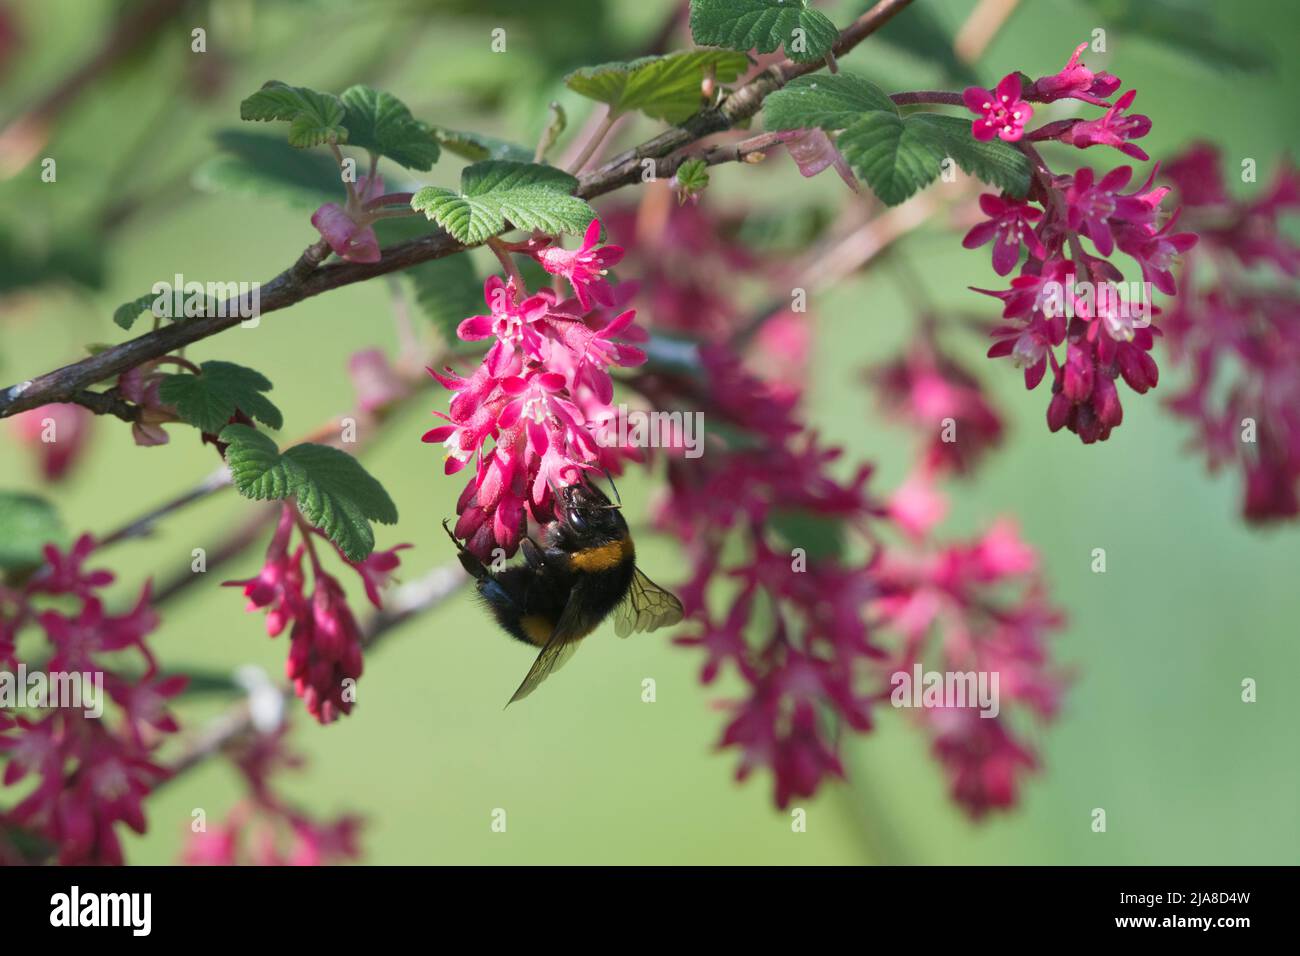 A Buff-Tailed Bumblebee (Bombus Terrestris) Feeding on the Flowers of a  Red-Flowering Currant (Ribes Sanguineum) in Sunshine Stock Photo